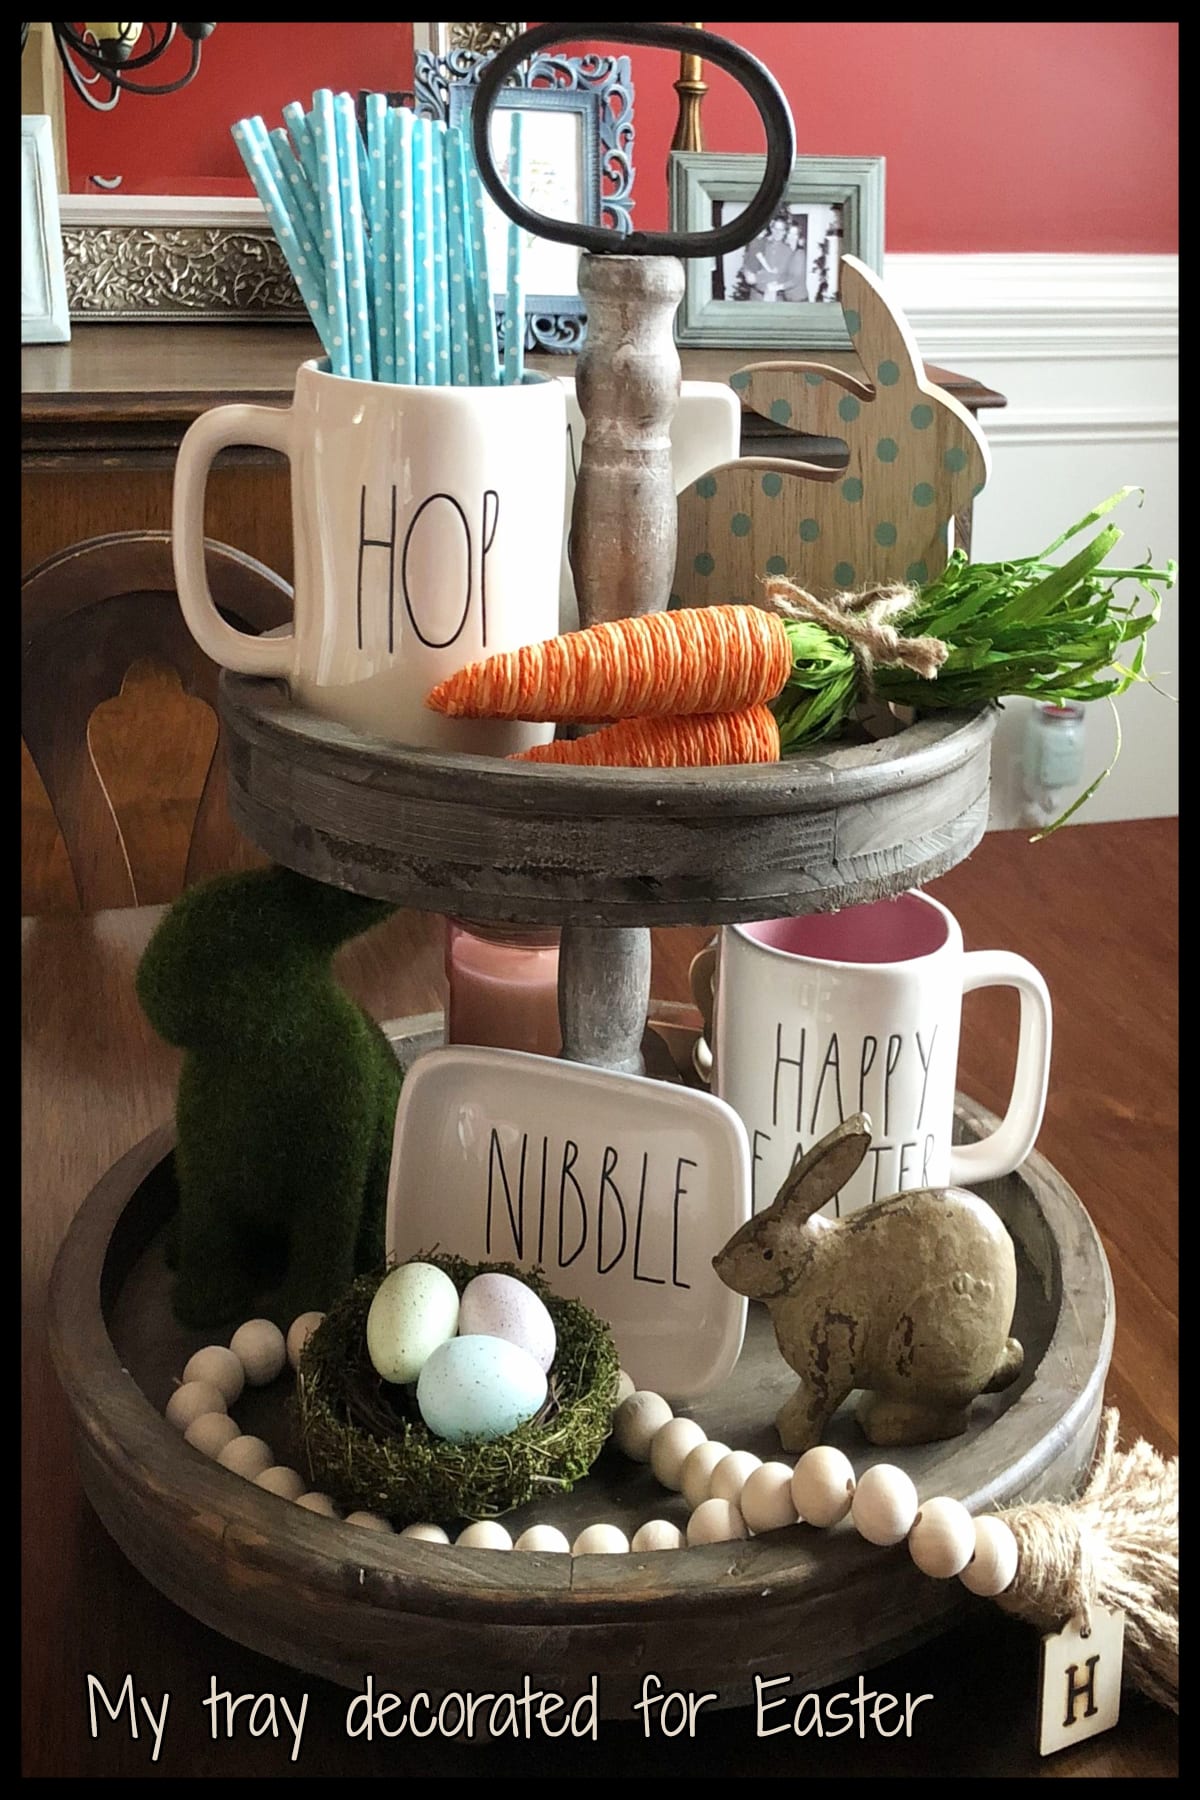 wooden tray decoration ideas for Easter and more cute ideas for decorating a wood tray for DIY home decor accents